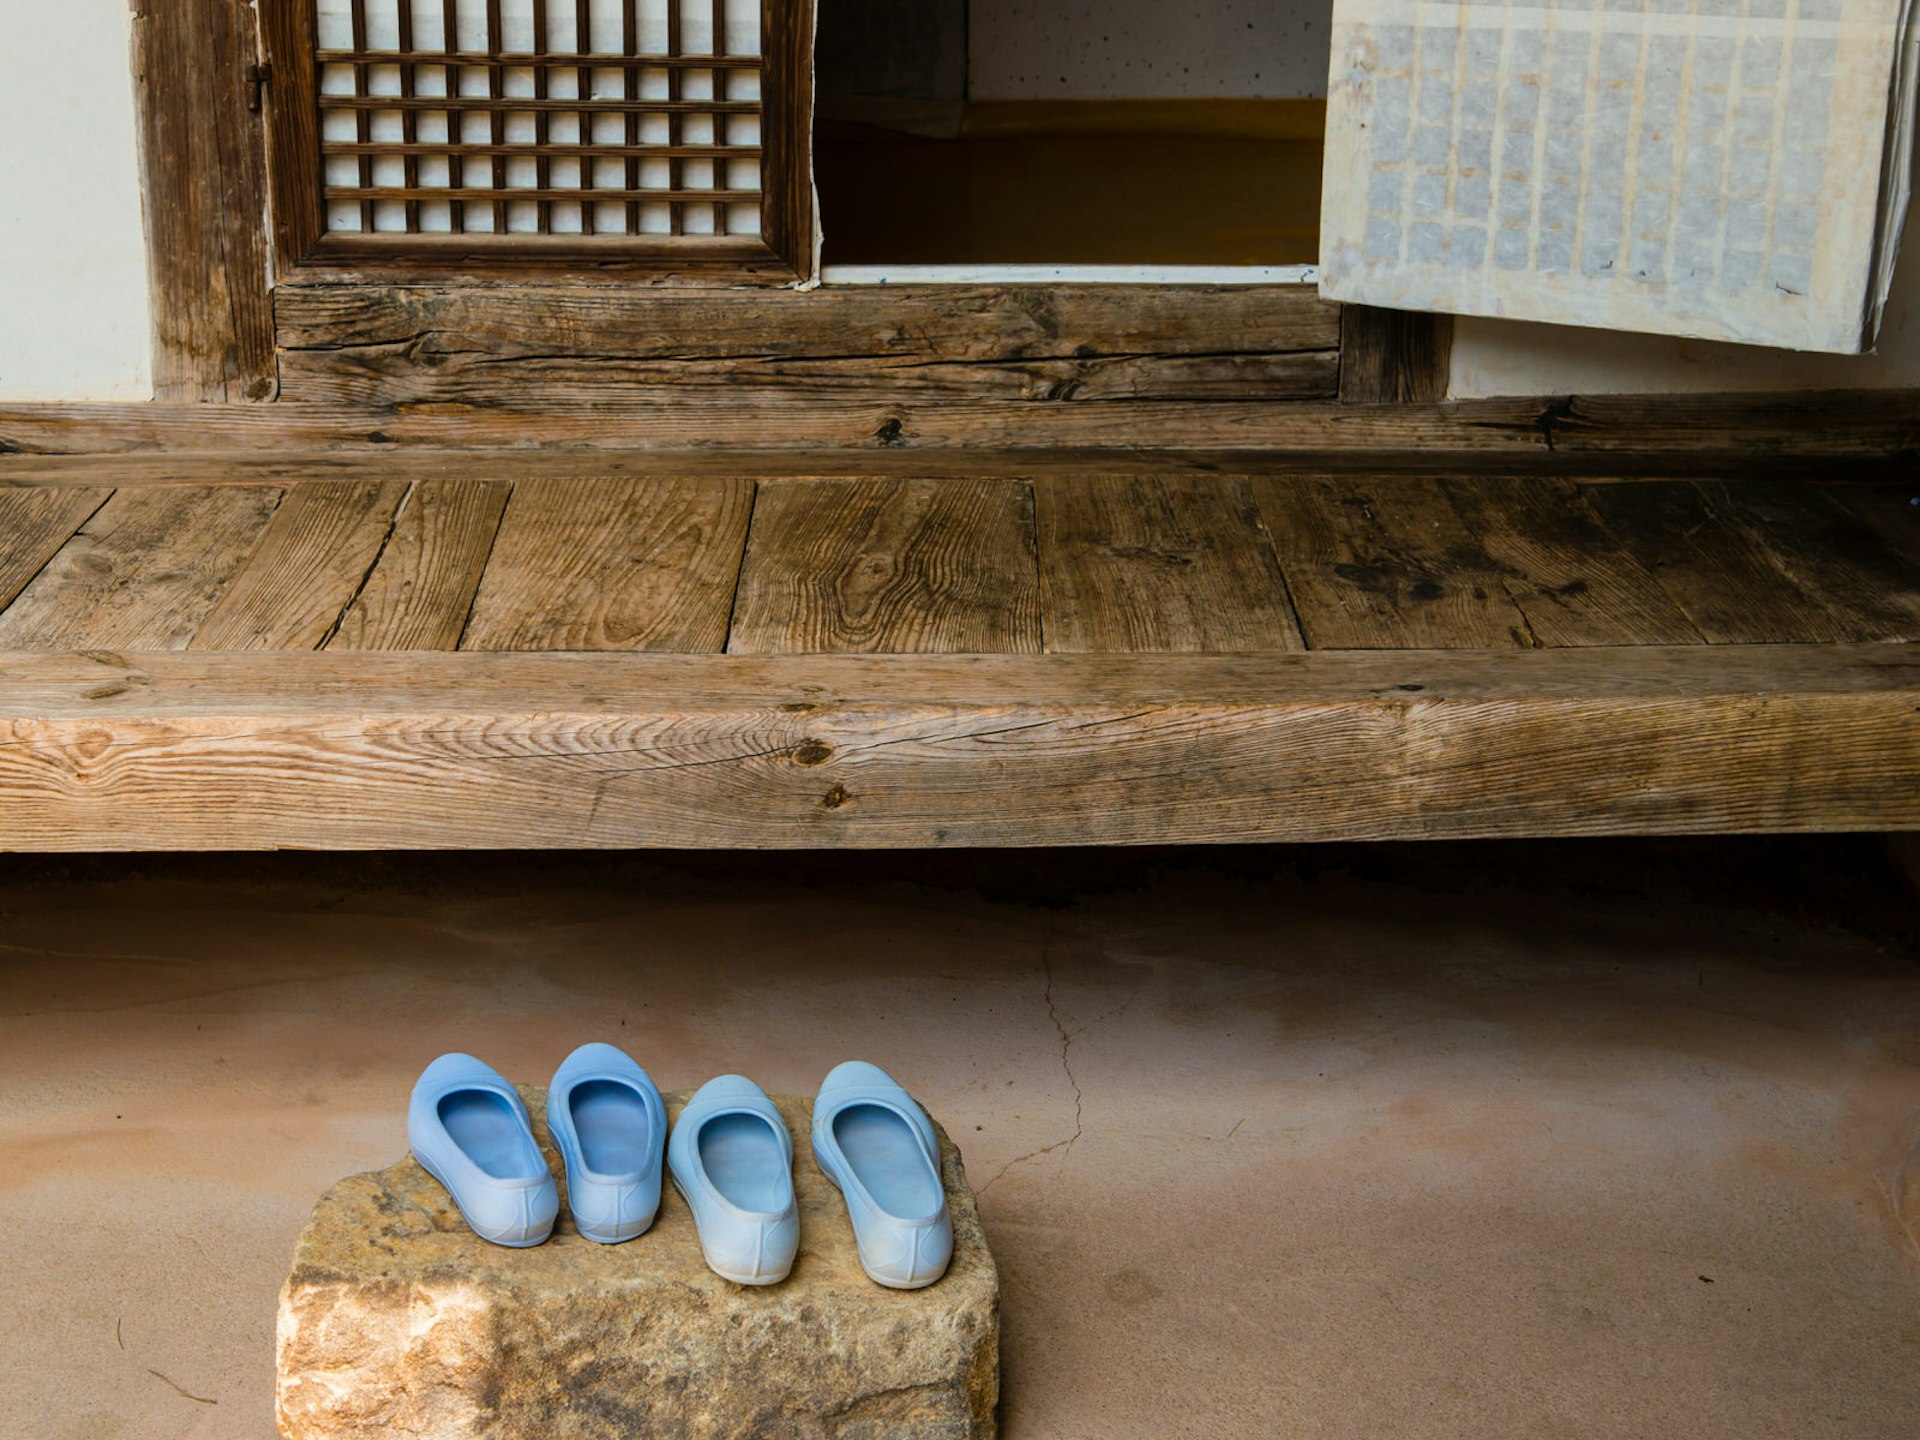 Two pairs of blue shoes left on a stone outside a wooden doorway to a traditional Korean home